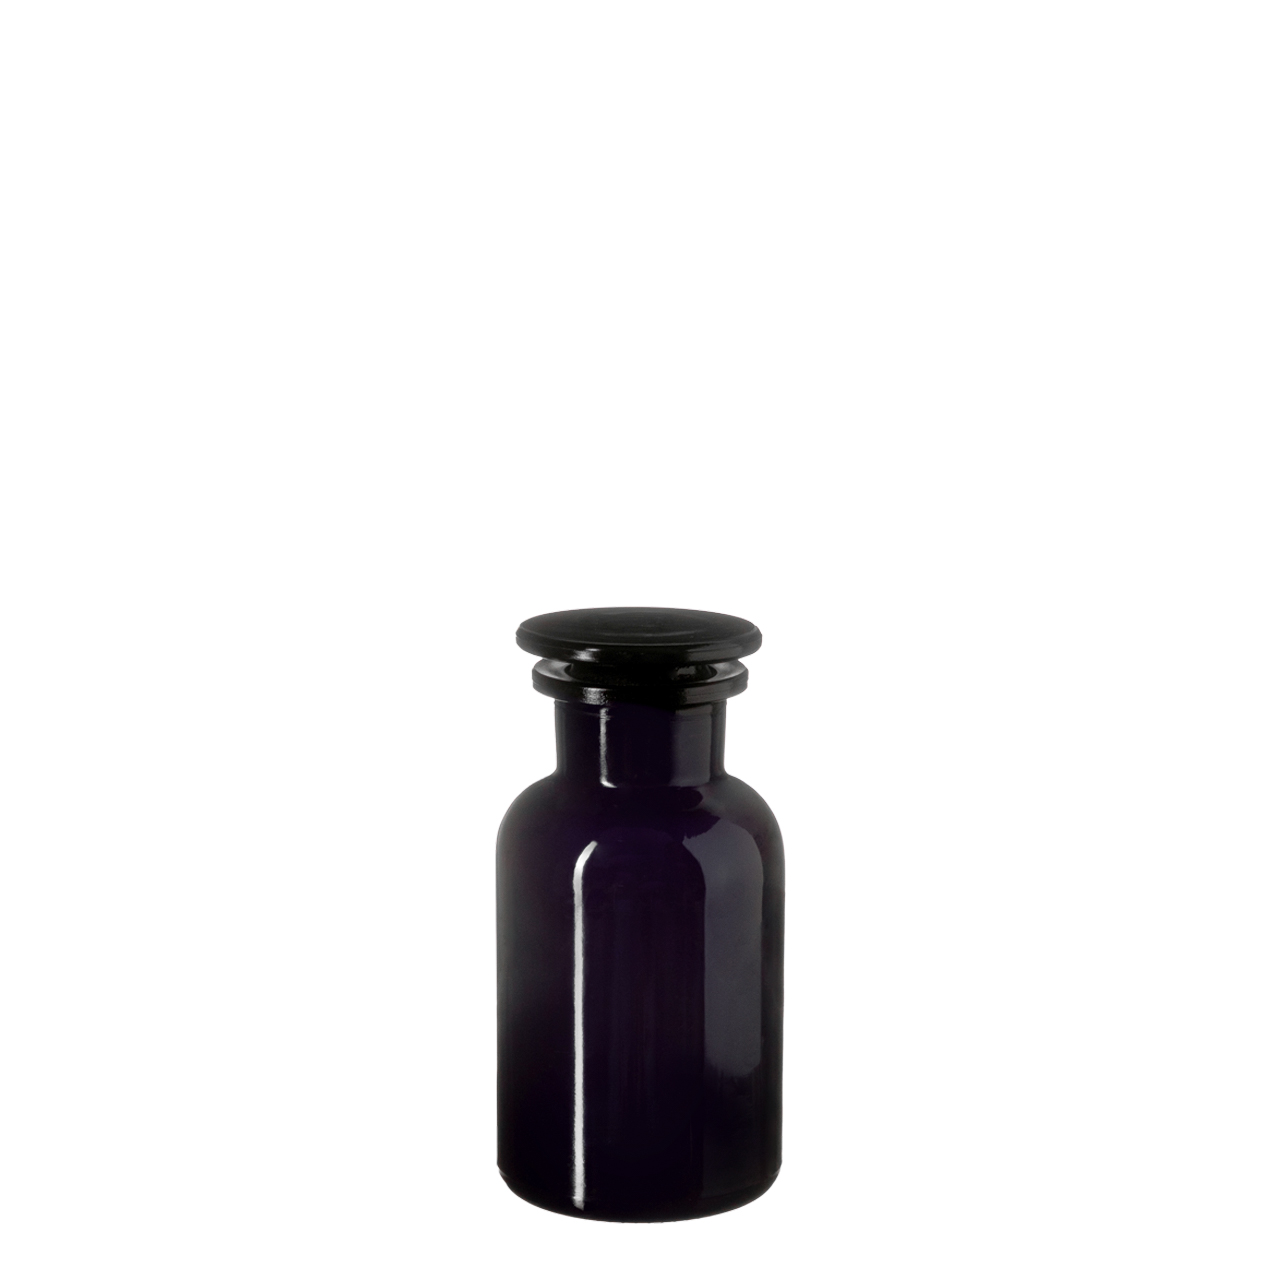 Apothecary jar Libra 250 ml, grinded glass stopper, Miron